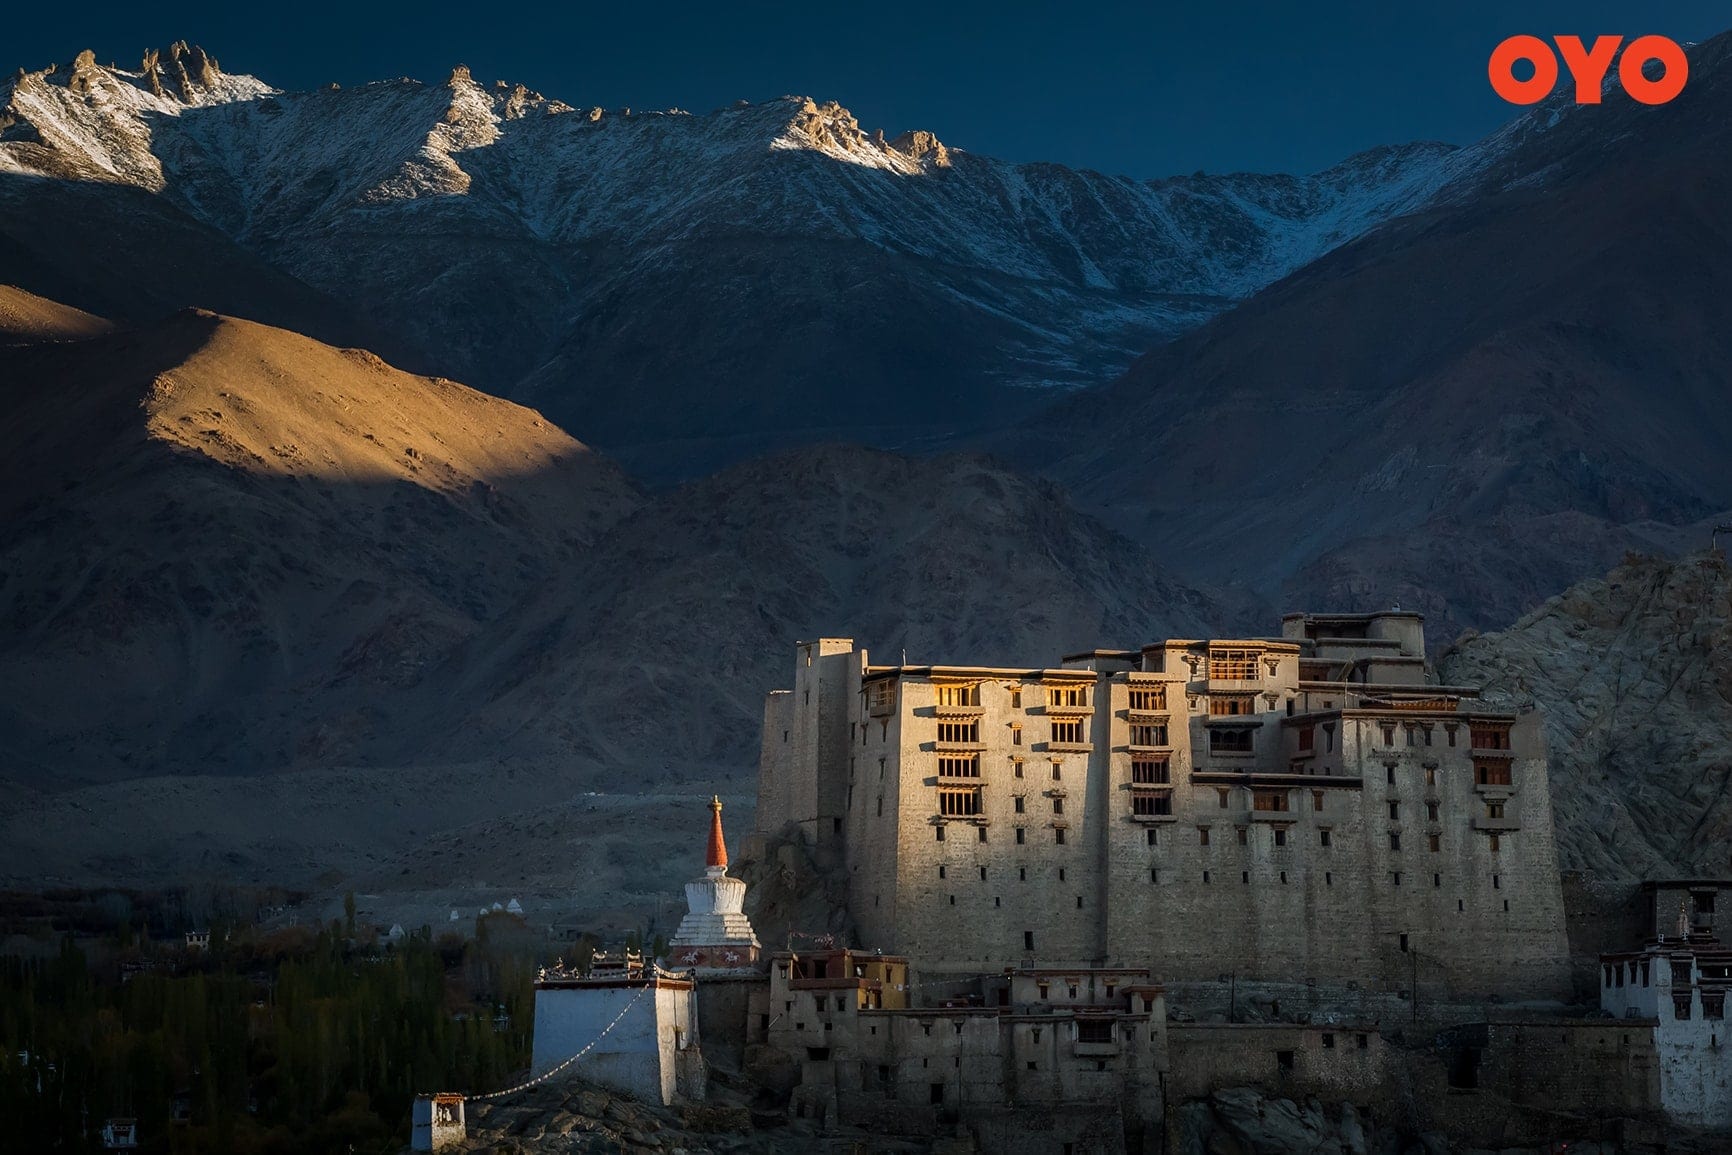 Leh Palace, Ladakh - One of the most famous palaces in India